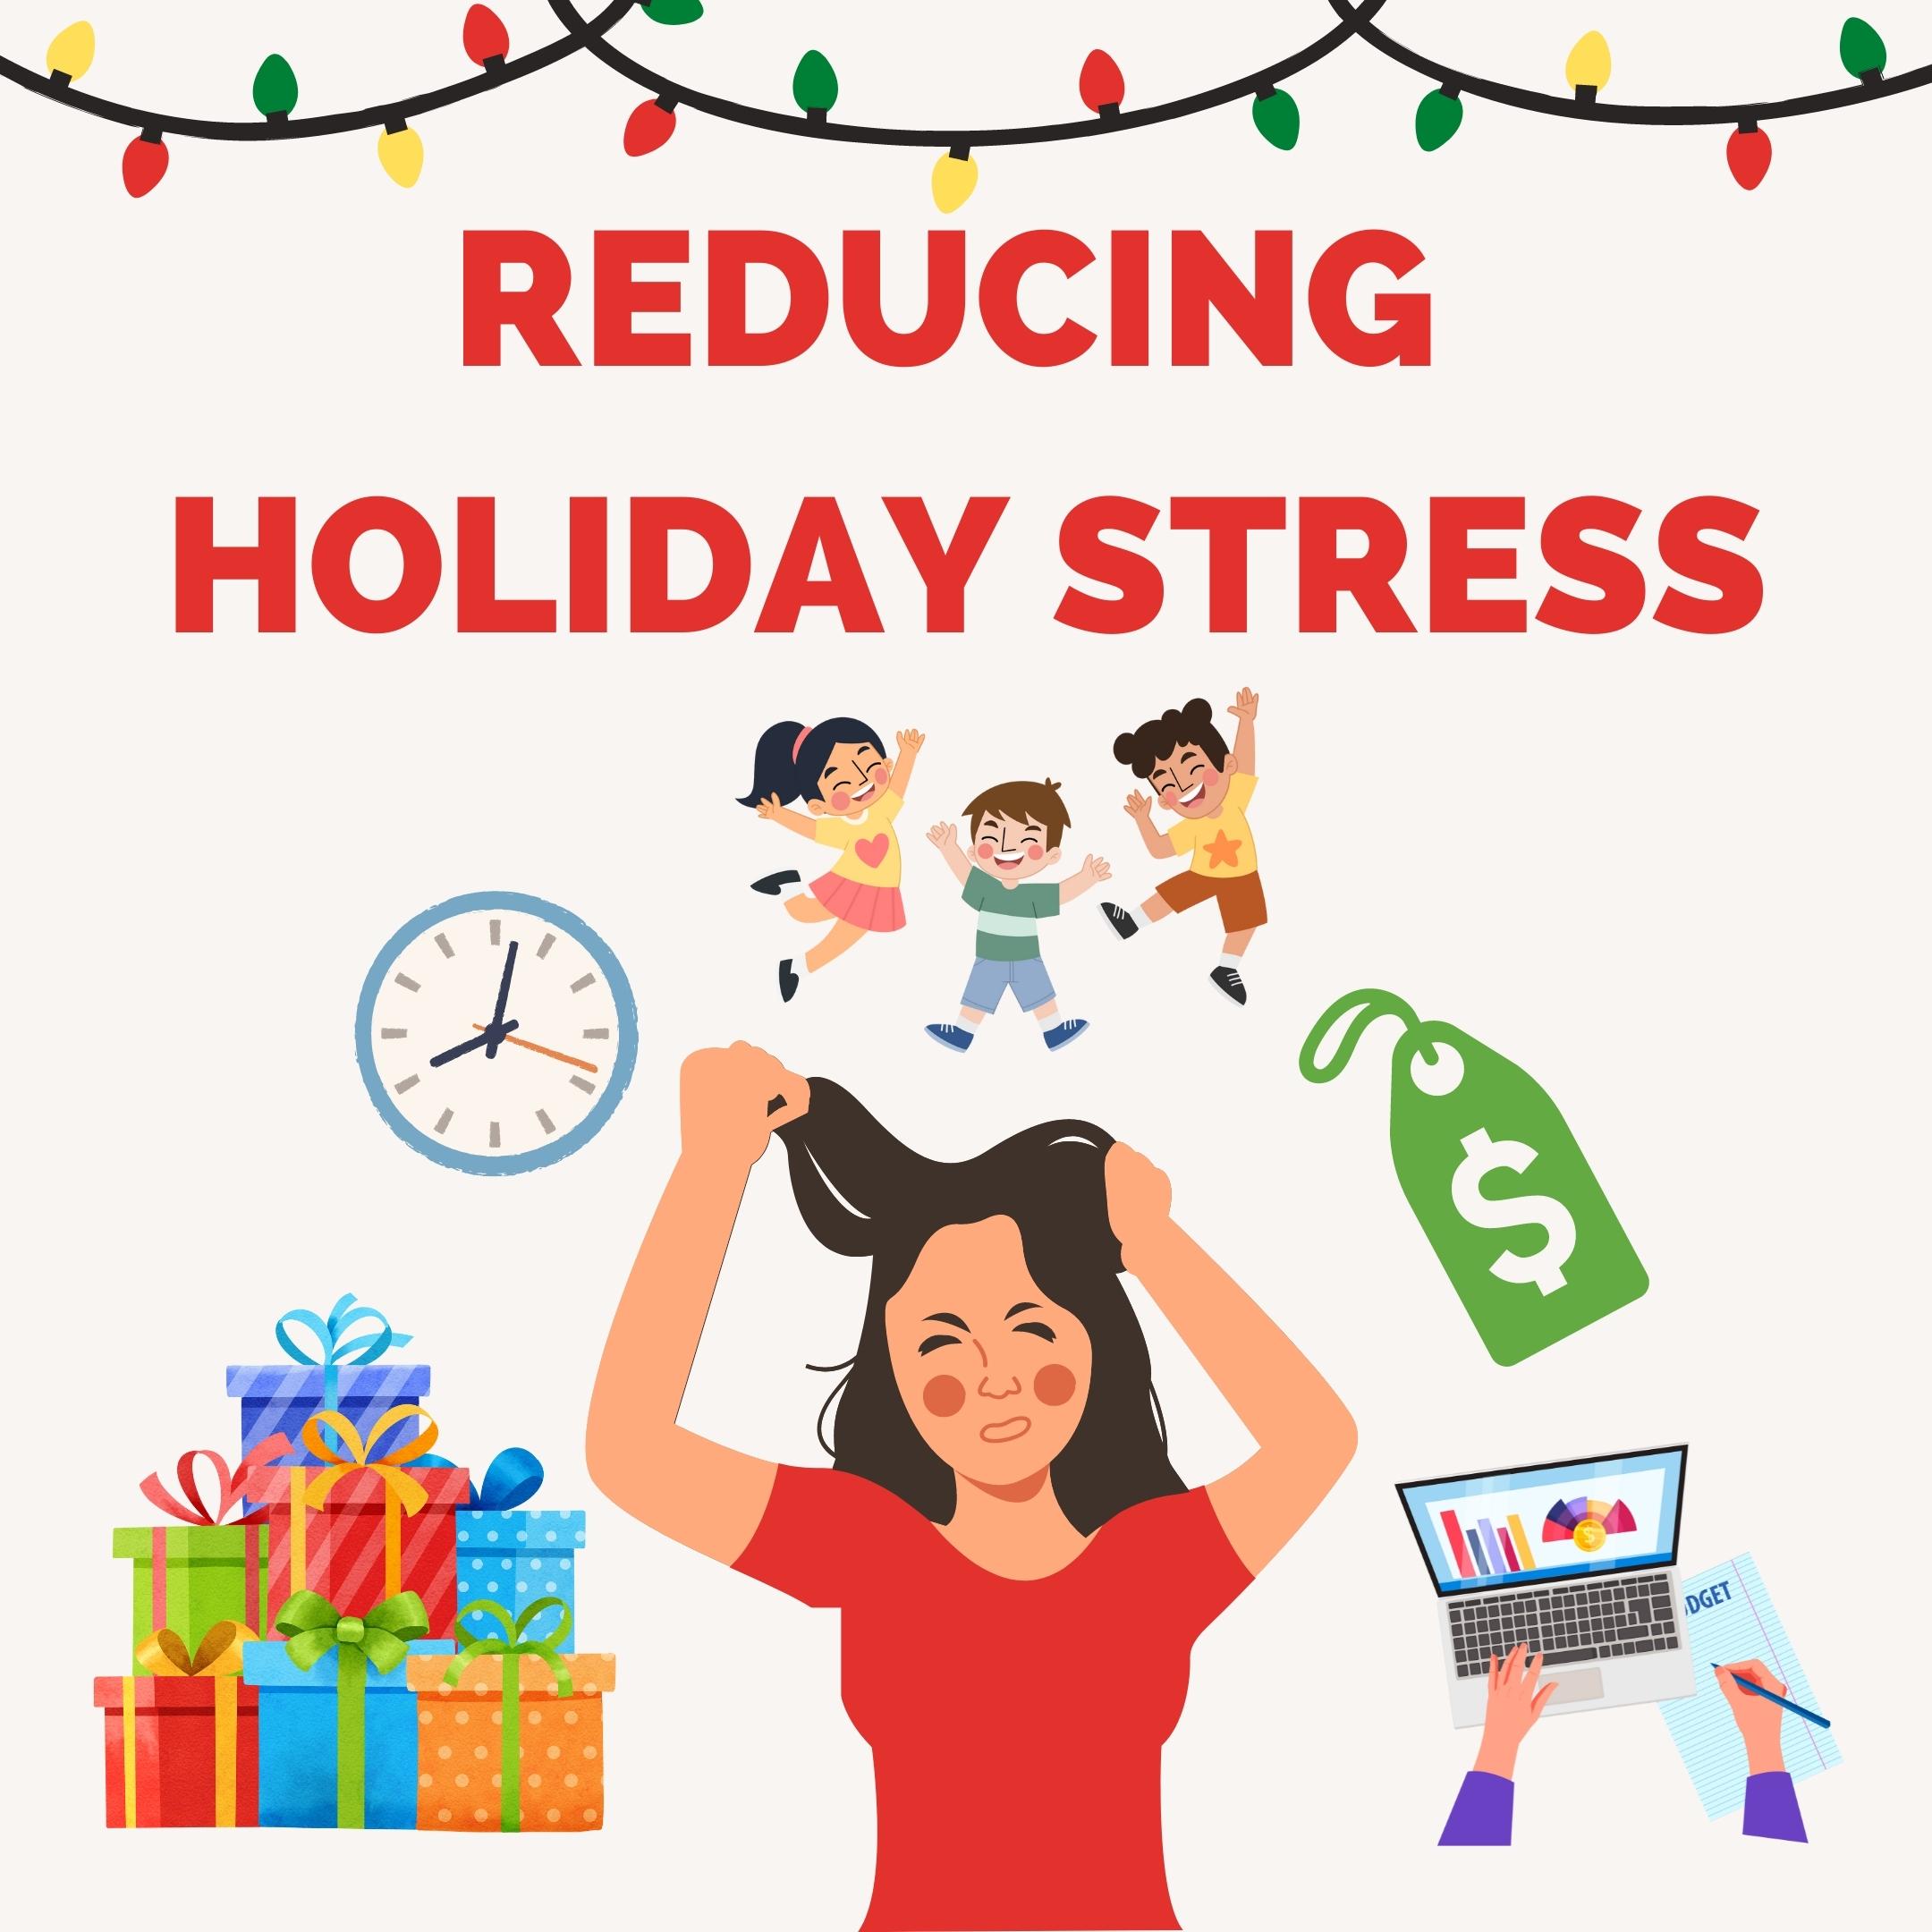 Reducing Holiday Stress, holiday stress, stress management for the holidays, holiday blues